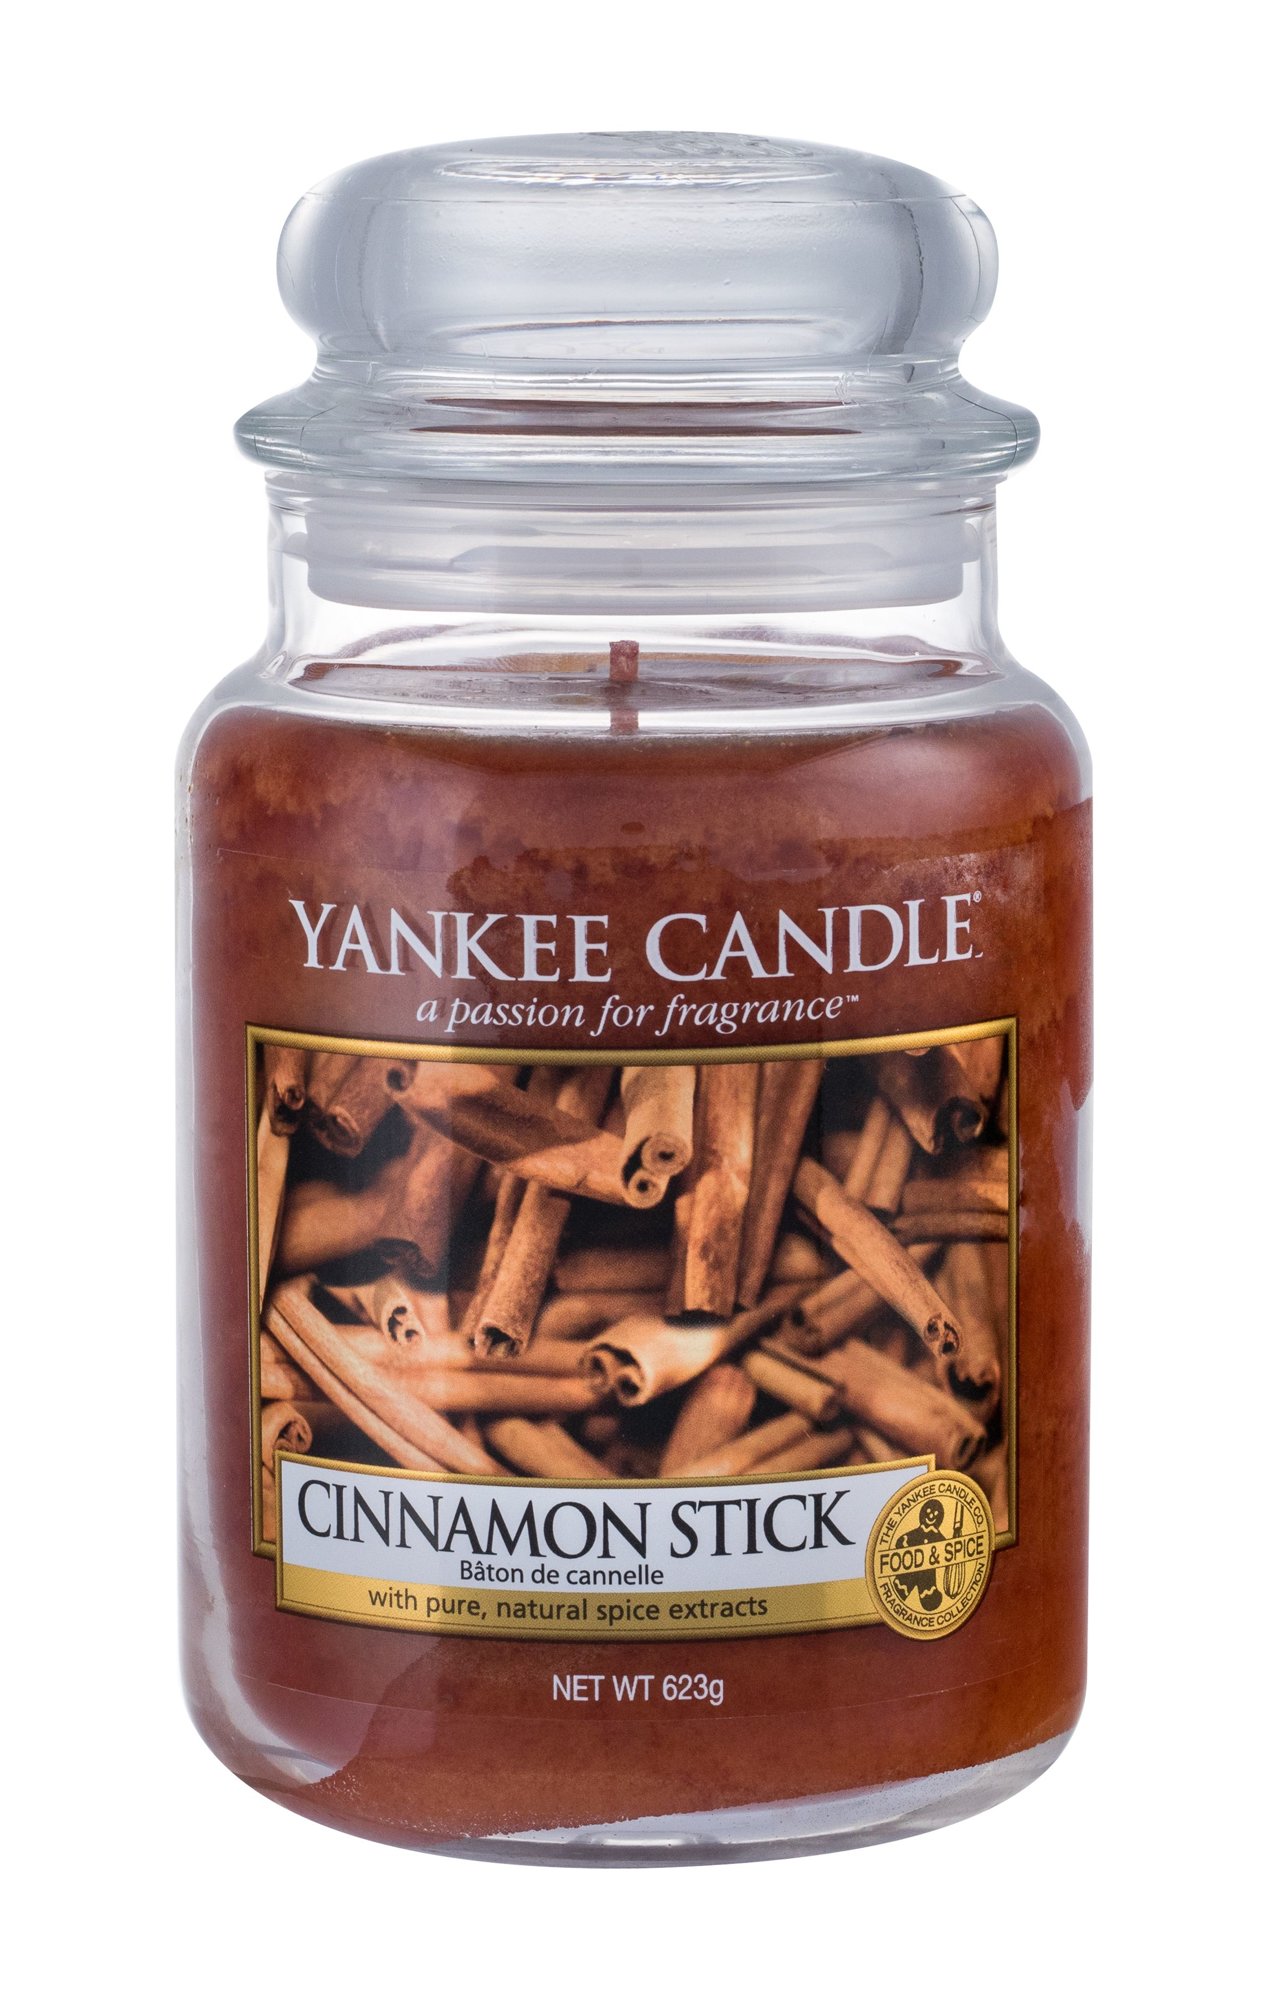 Yankee Candle Cinnamon Stick 623g Kvepalai Unisex Scented Candle